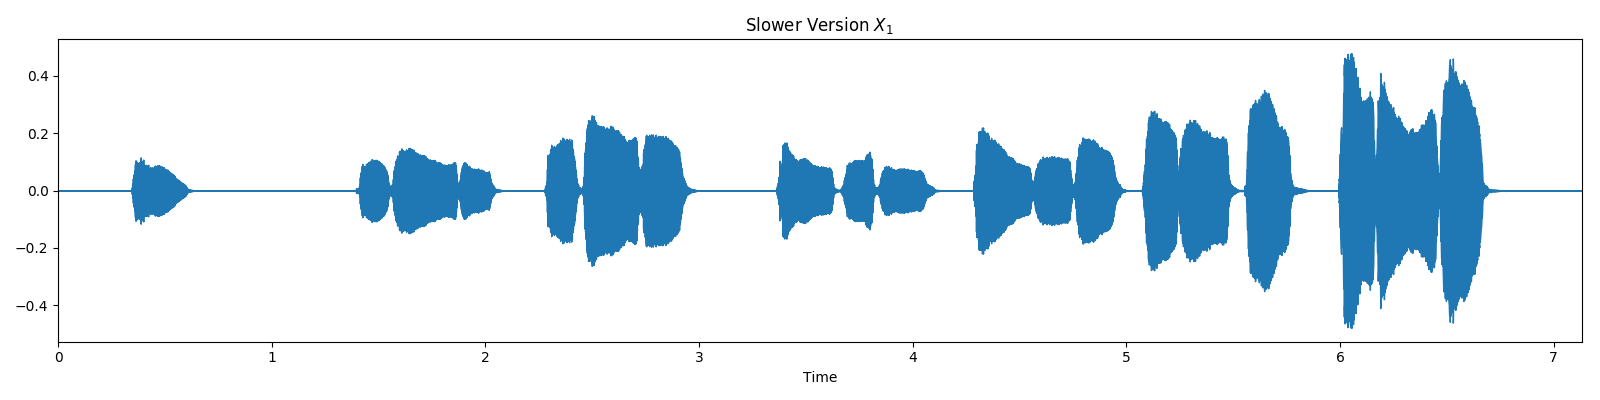 ../_images/sphx_glr_plot_music_sync_001.png